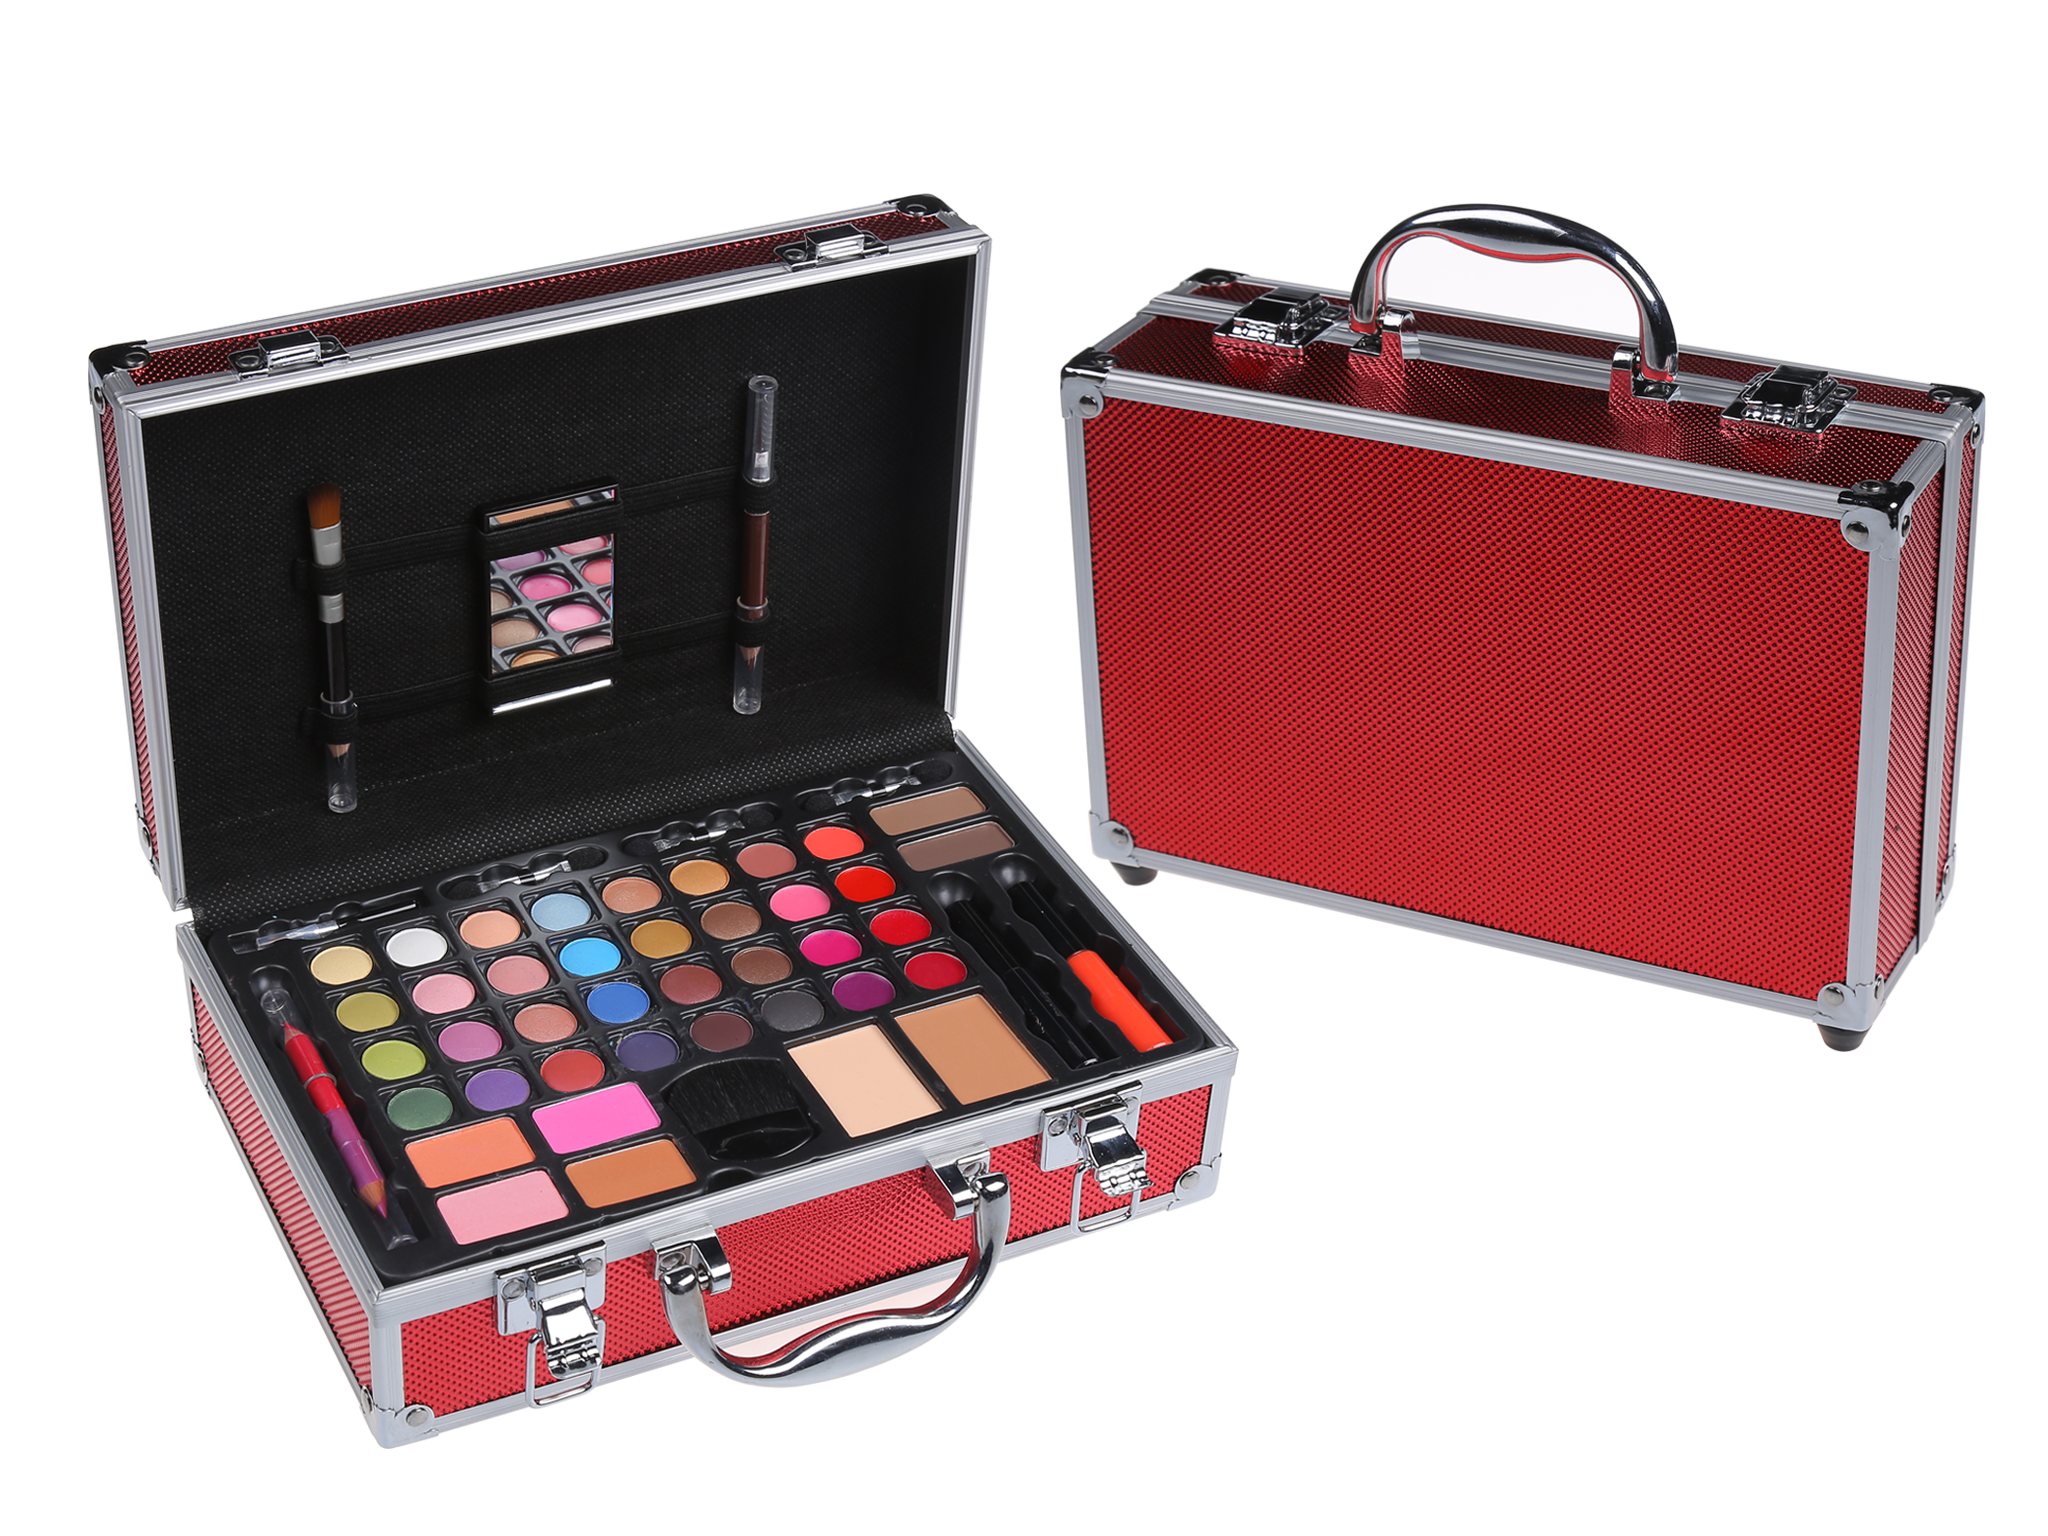 RED CARRY ALL TRAIN CASE MAKEUP KIT